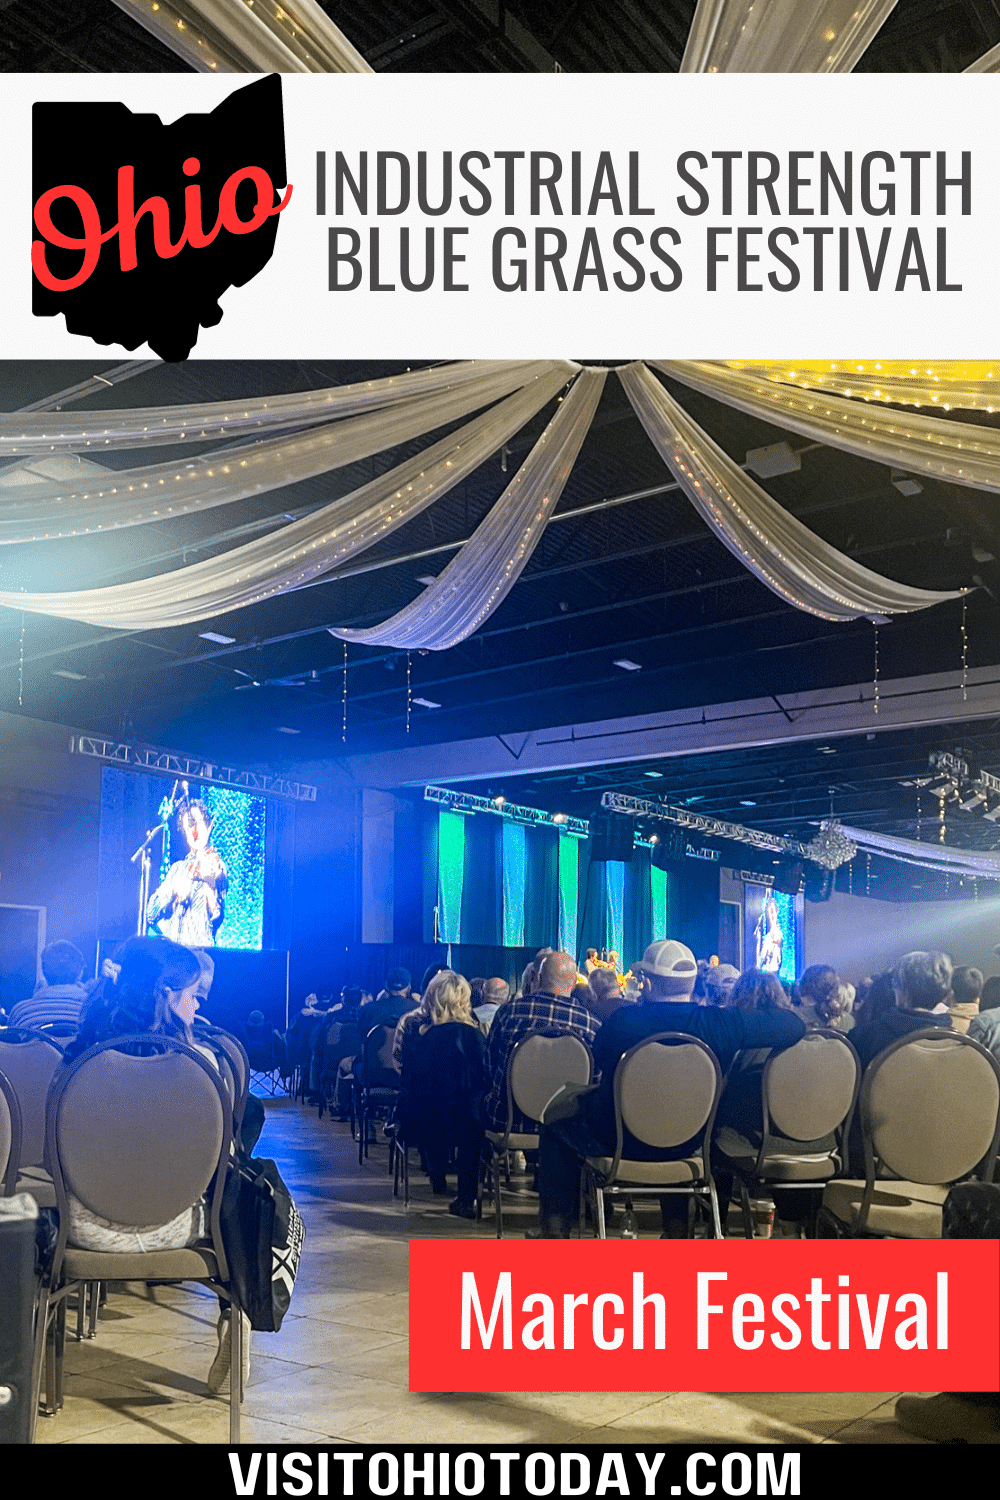 Industrial Strength Bluegrass Festival is an indoor music festival that showcases the best in bluegrass and American roots music. It takes place in late March at the Roberts Convention Centre in Wilmington.